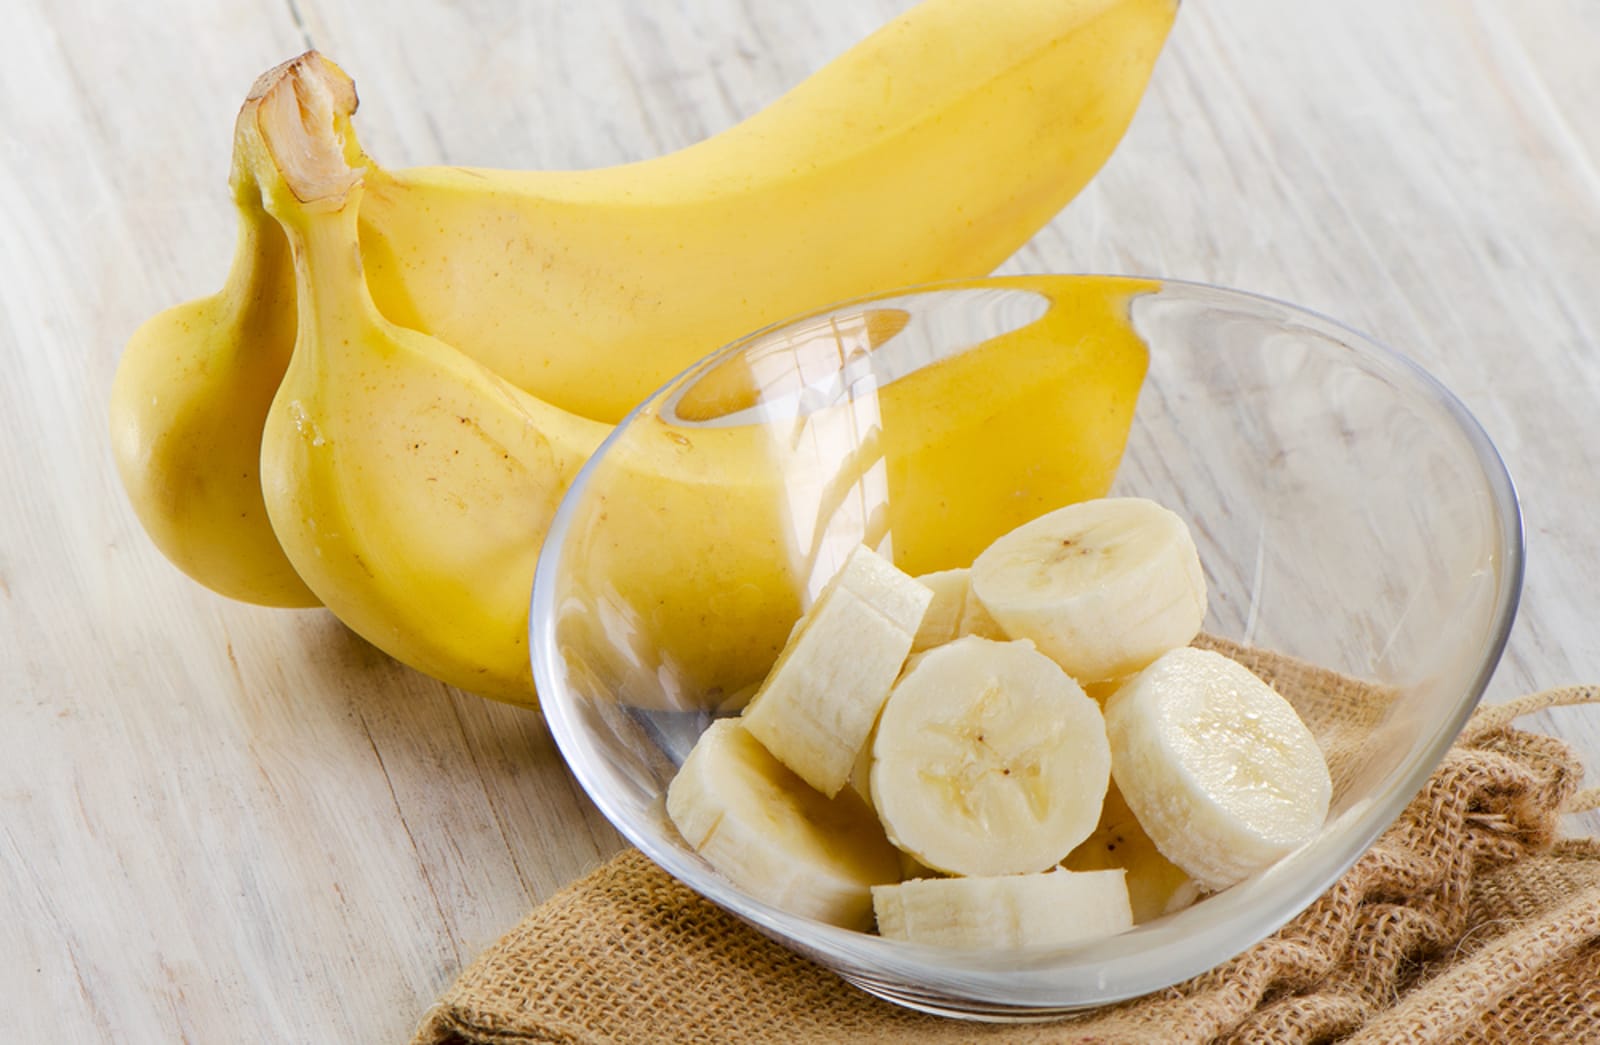 Sleep Tea, Conditioner, and Teeth Whitening: 7 Surprising Ways You Can Use Bananas